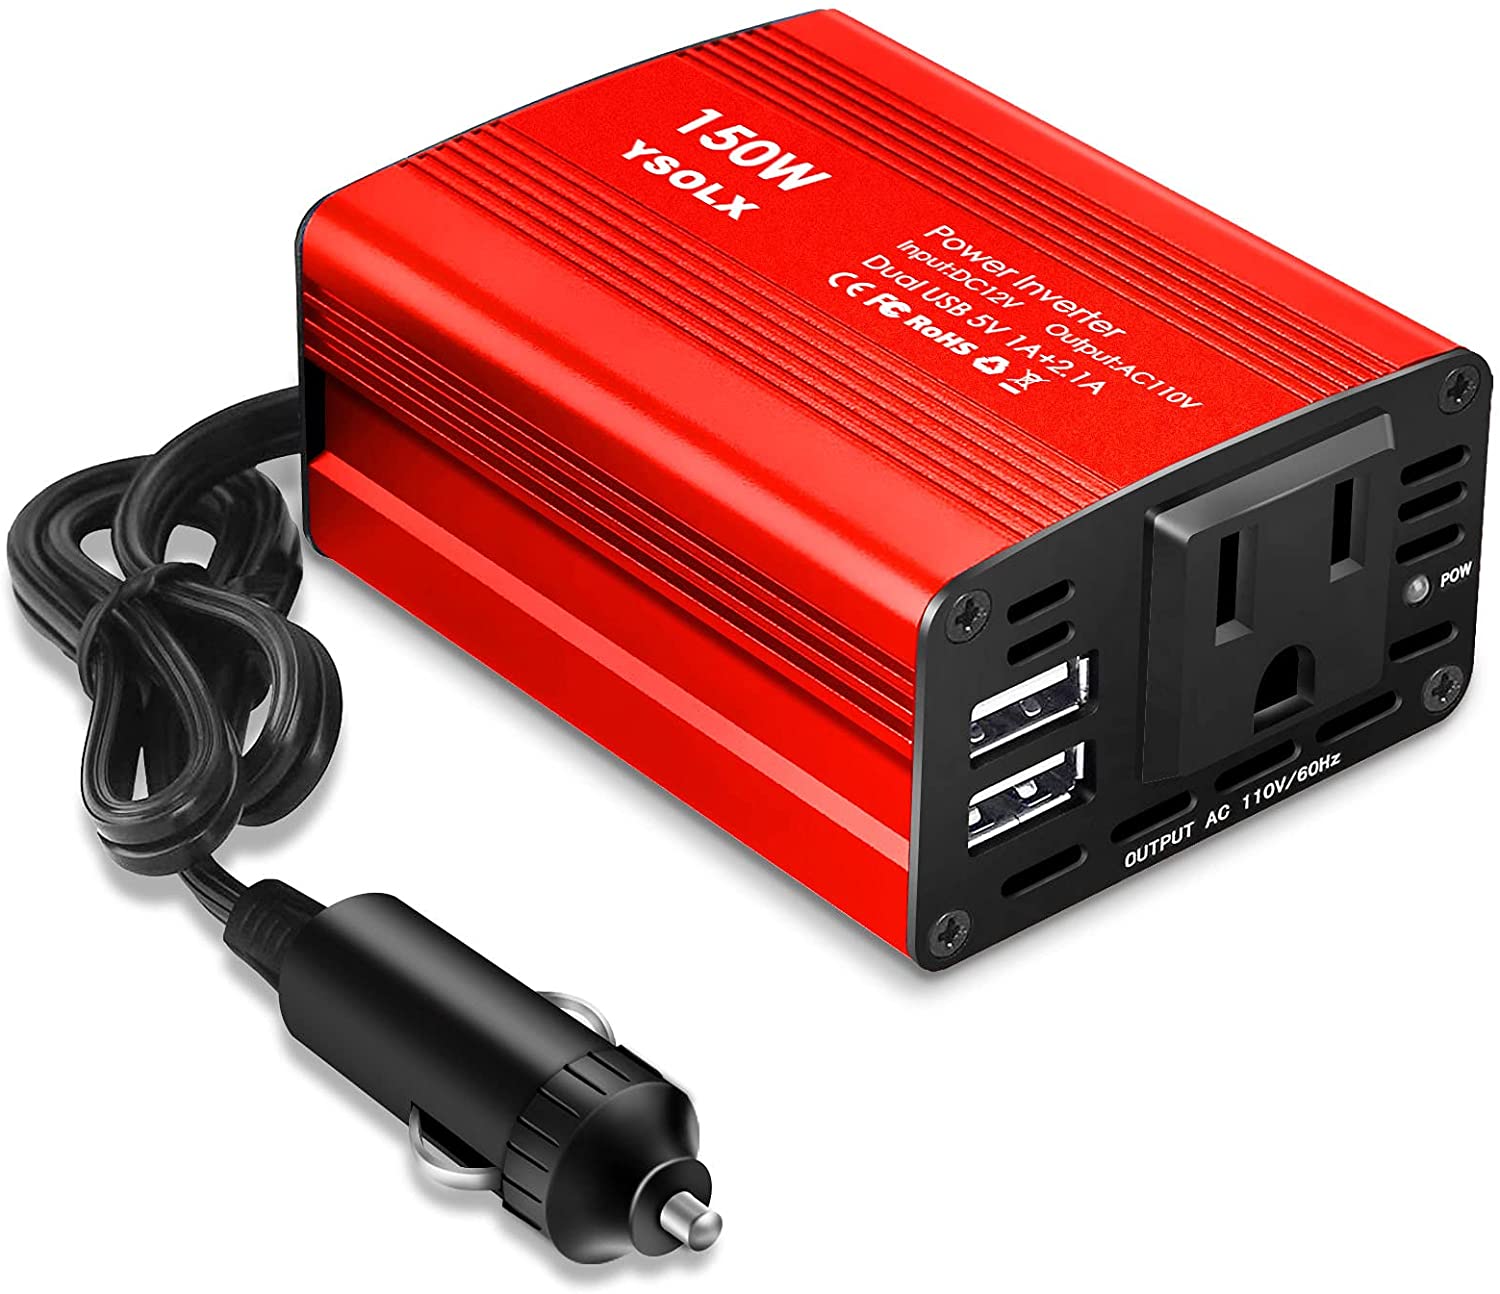 BuyWhat BW-150 150W Car Power Inverter DC 12V to 110V AC Outlet Converter 3.1A Dual USB Car Charger Adapter(Red)